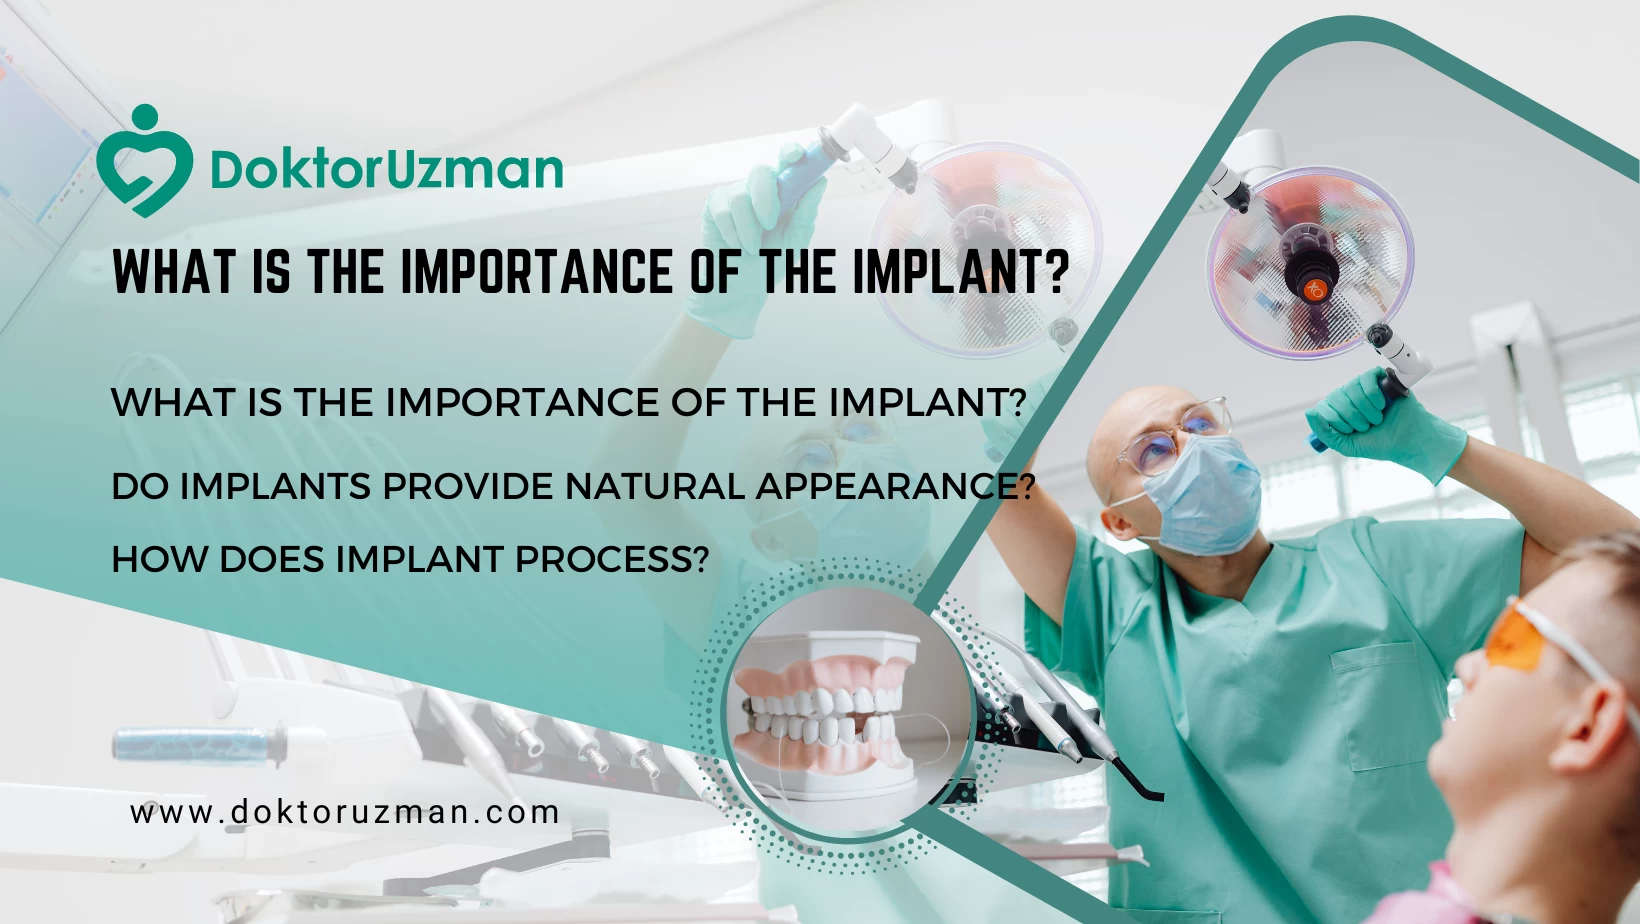 WHY IMPLANT?